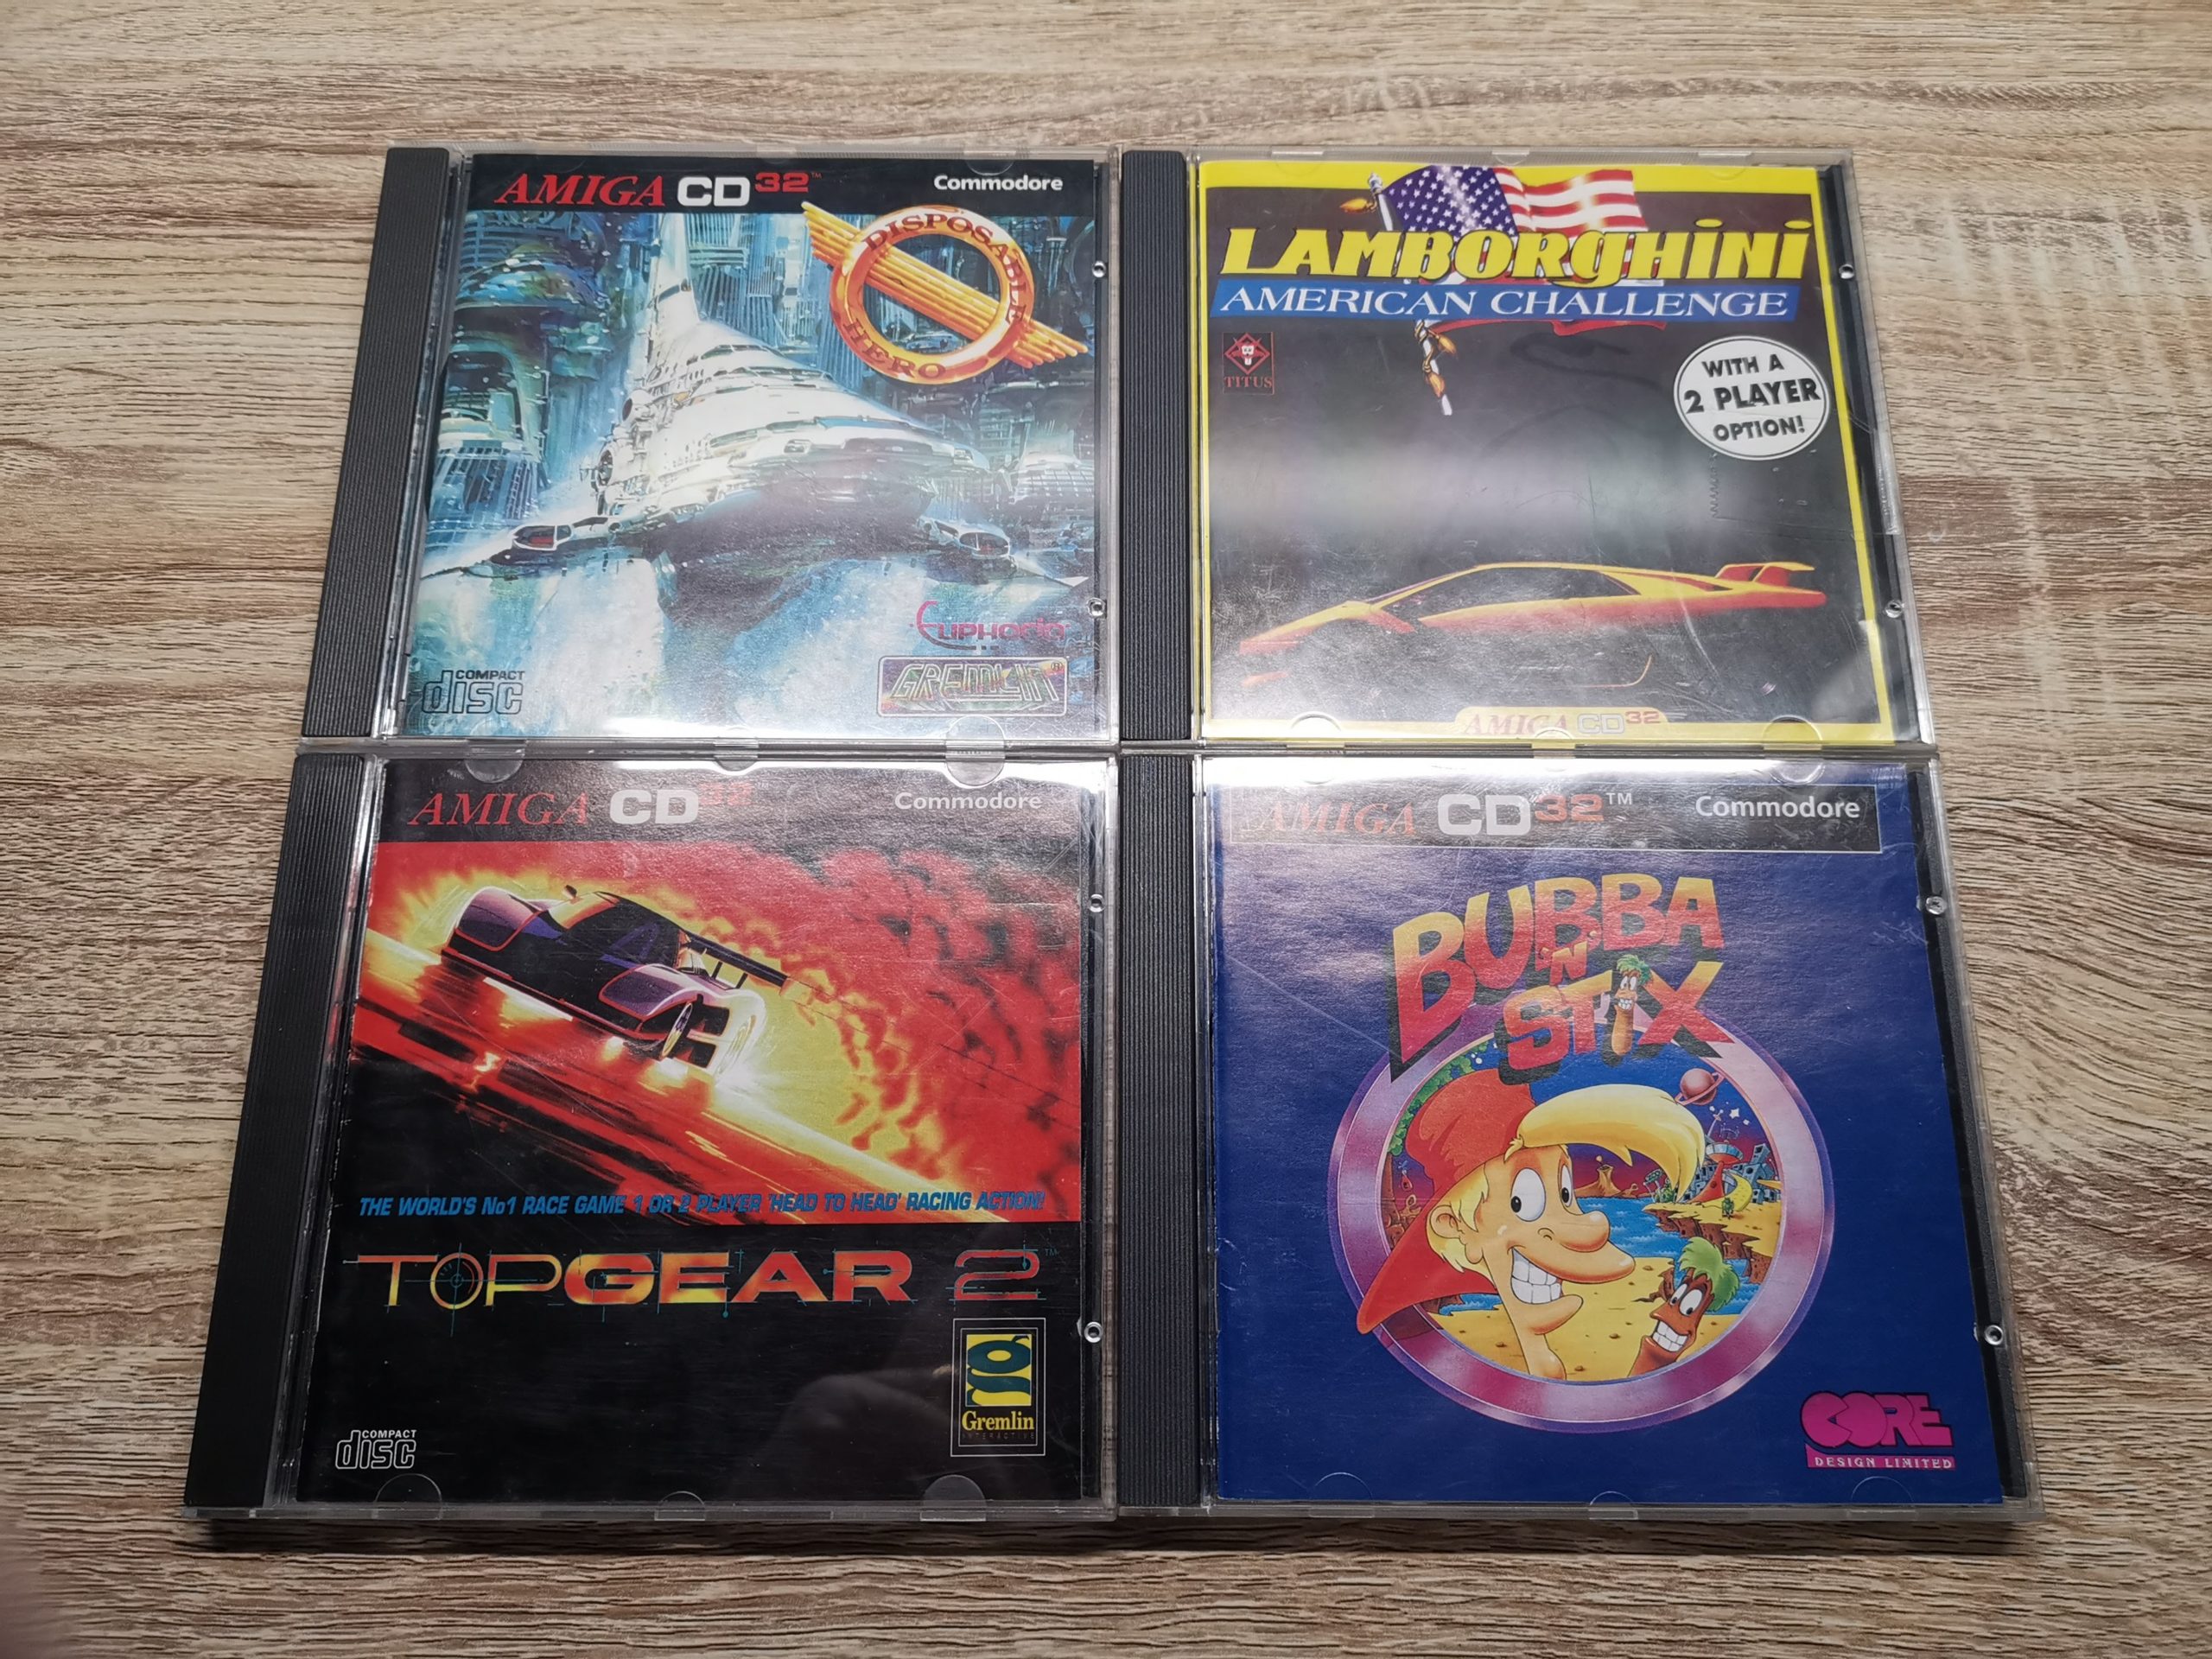 10 DVD ULTIMATE Collection Amiga CD32 Over 39GB Games Applications Commodore 